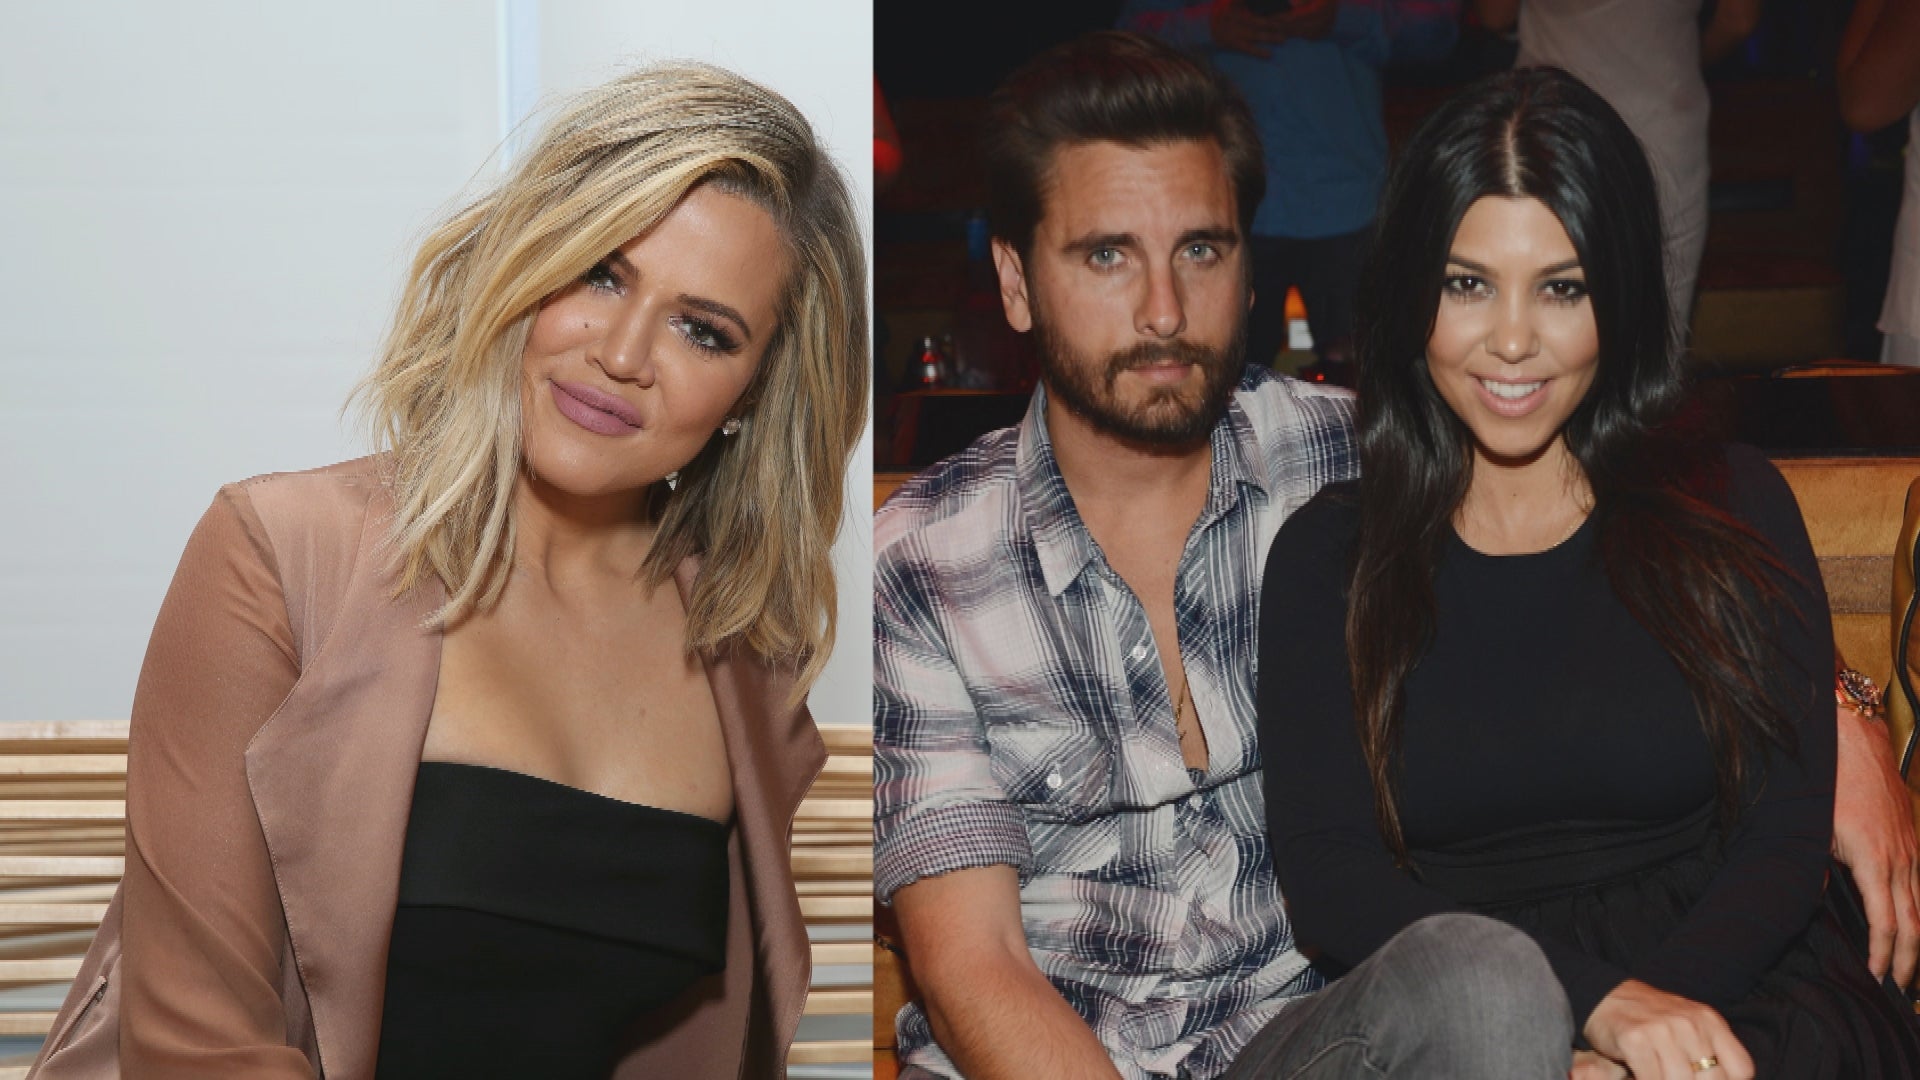 Khloé, Tristan and 'The Kardashians' lessons on healthy relationships